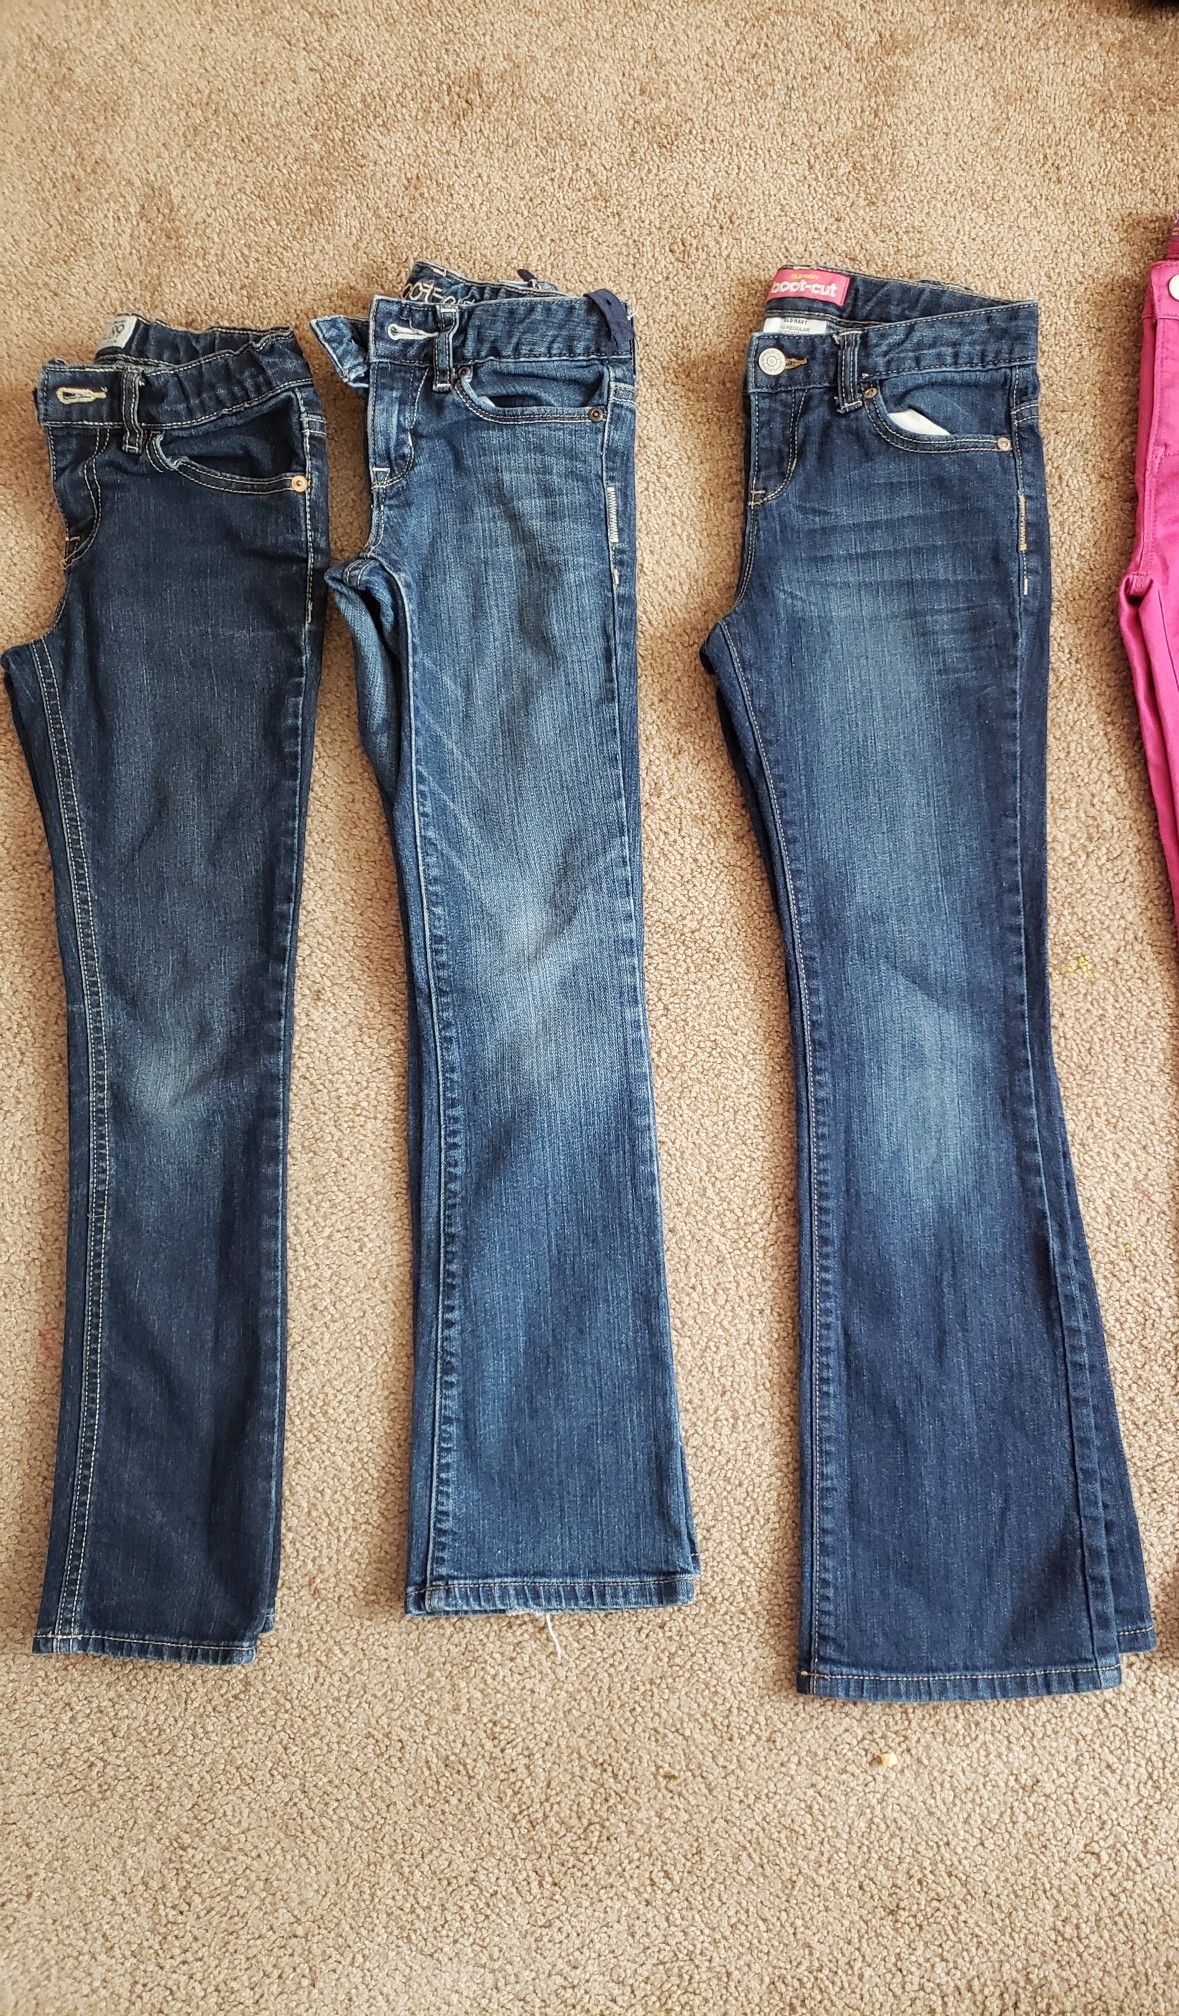 Girls jeans size 10